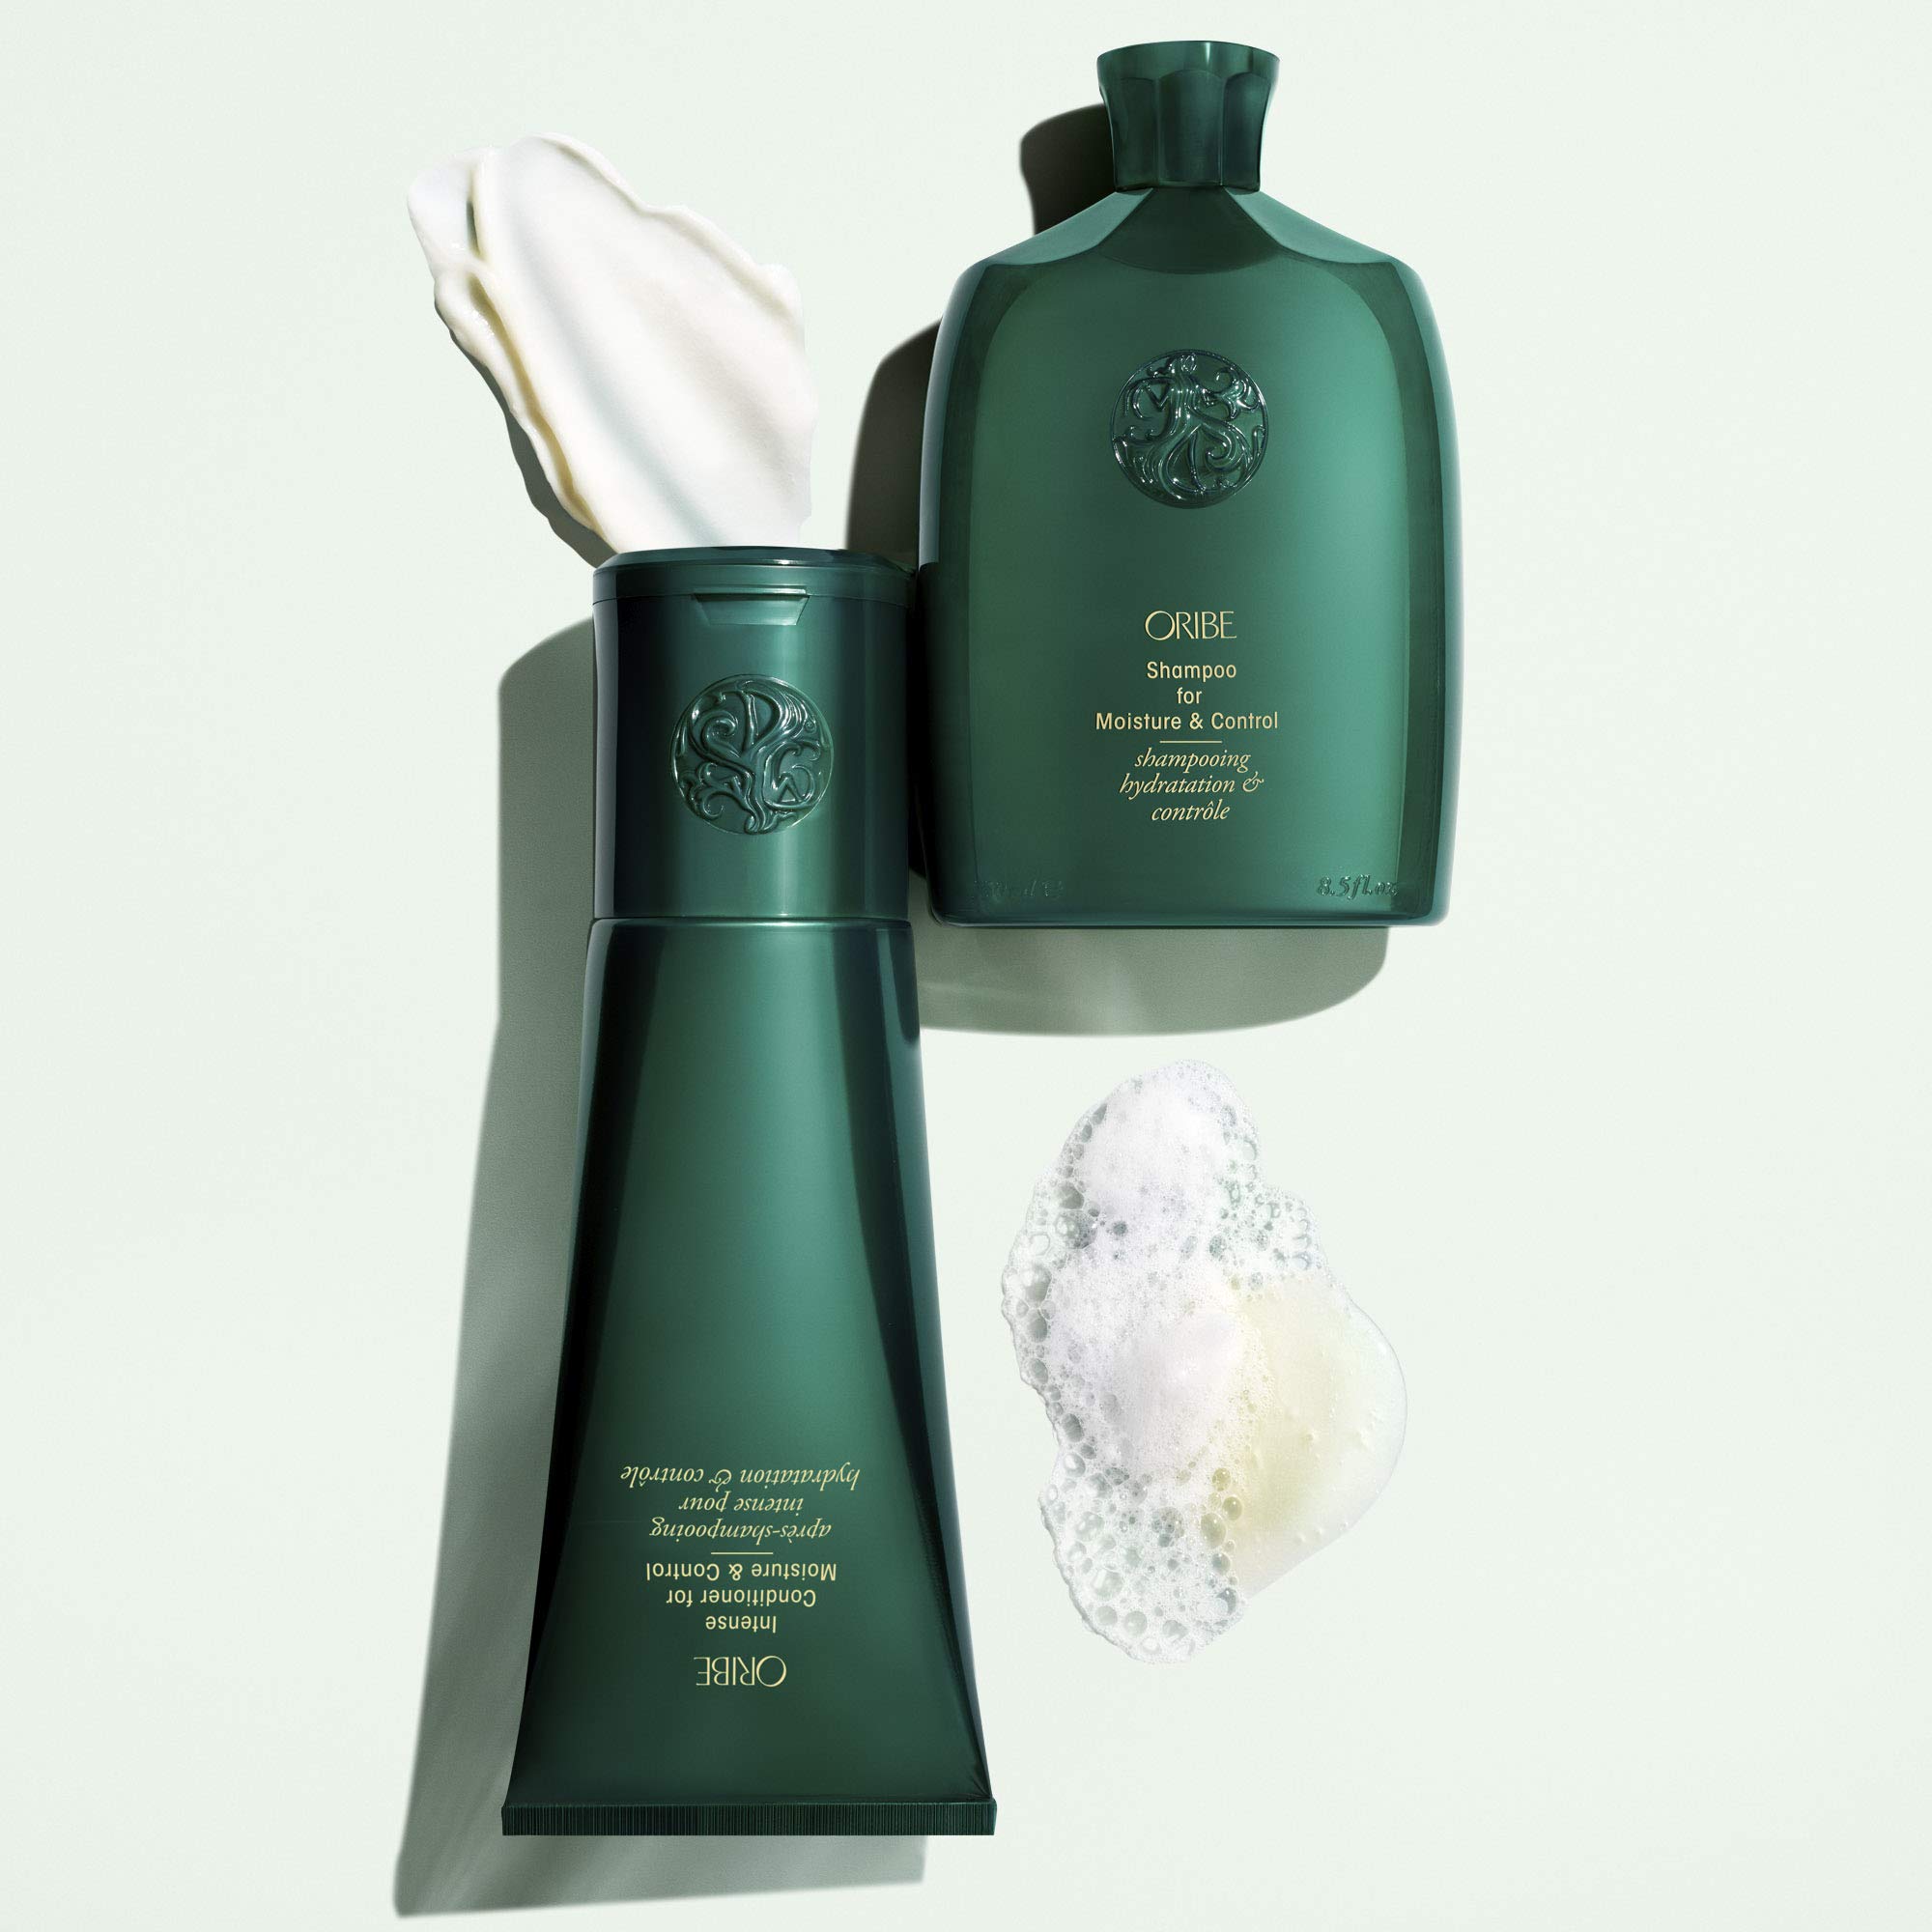 ORIBE Shampoo and Conditioner for Moisture & Control Bundle